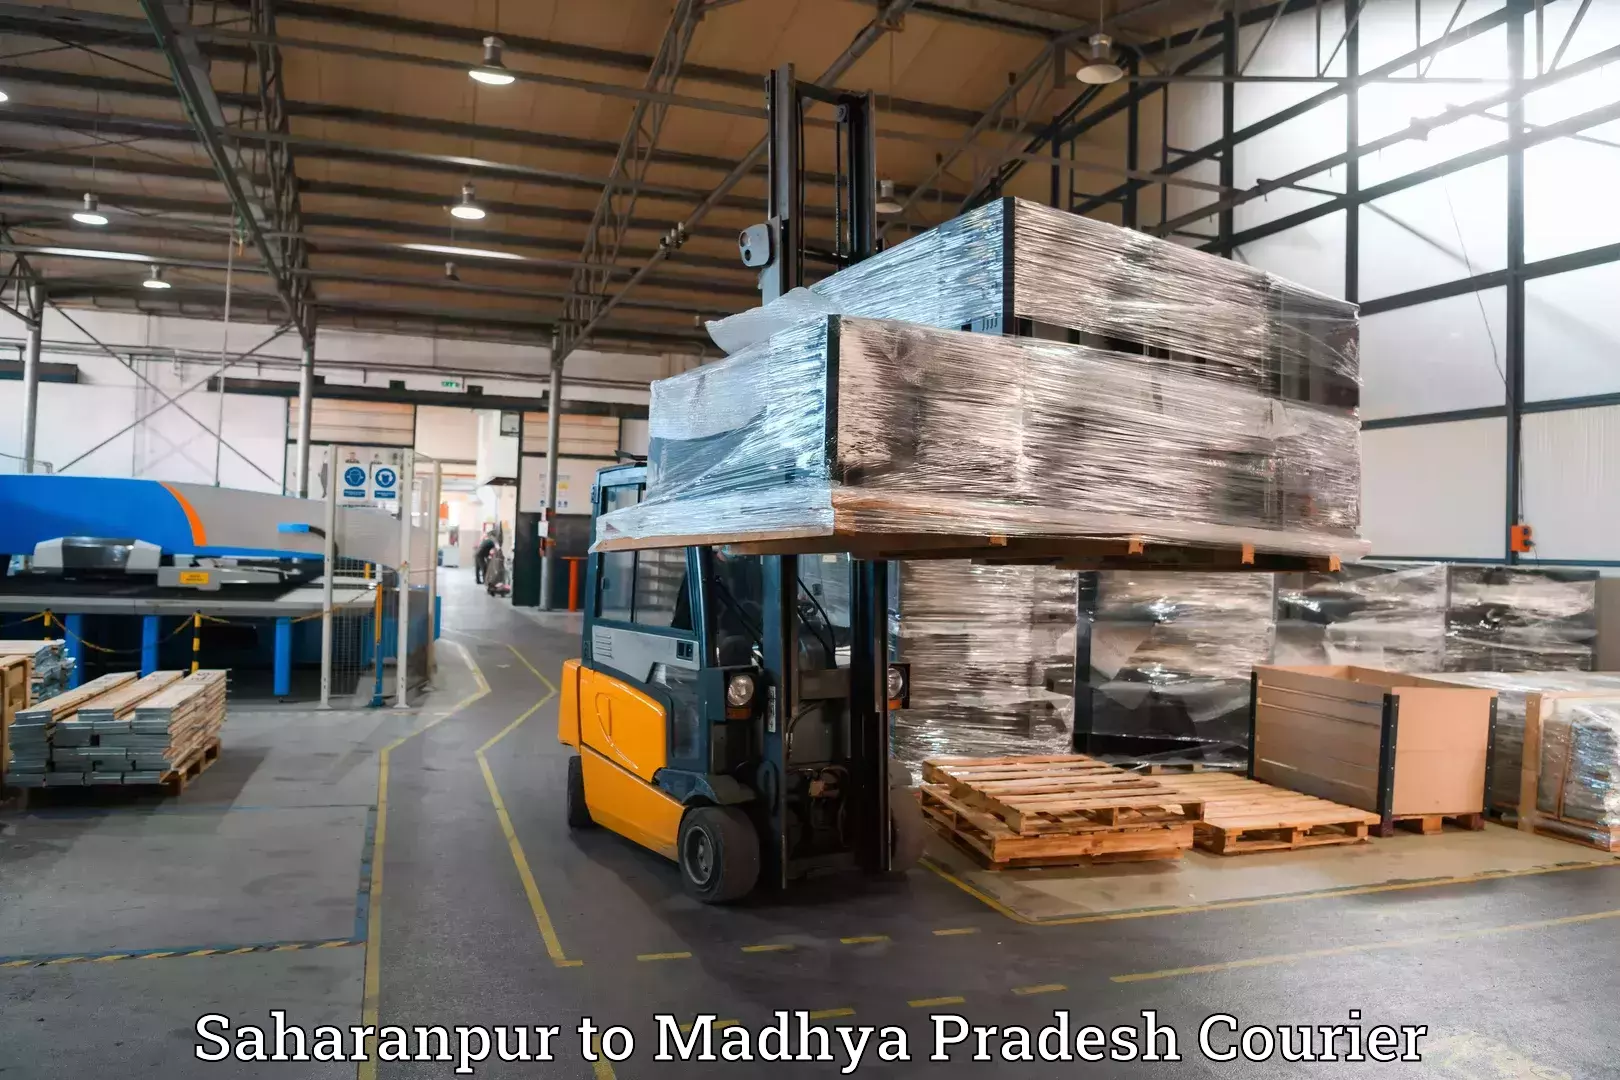 Baggage shipping experience in Saharanpur to Sihora